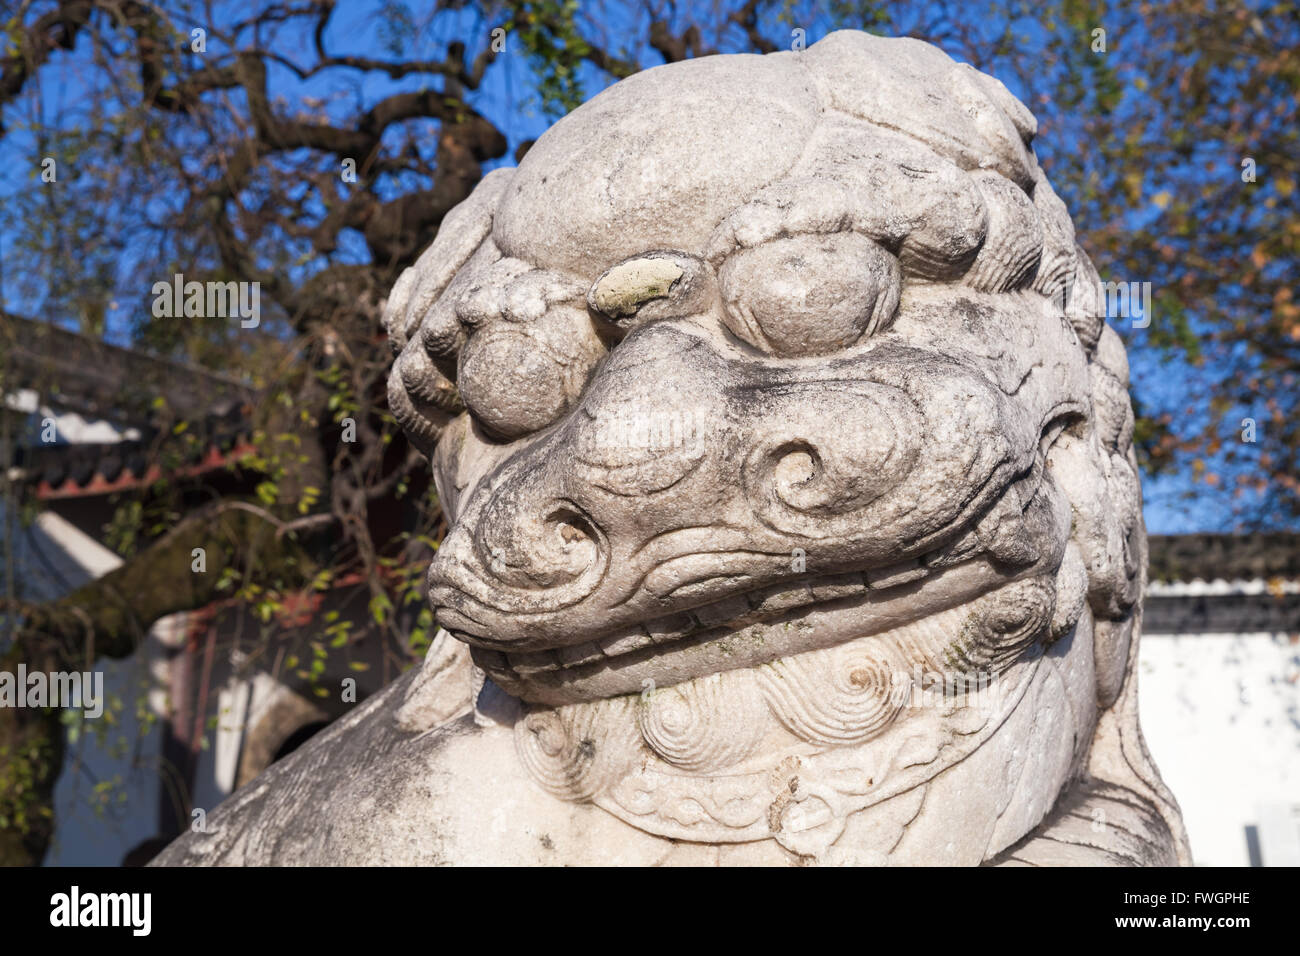 Ancient Chinese lion statue made of white stone Stock Photo